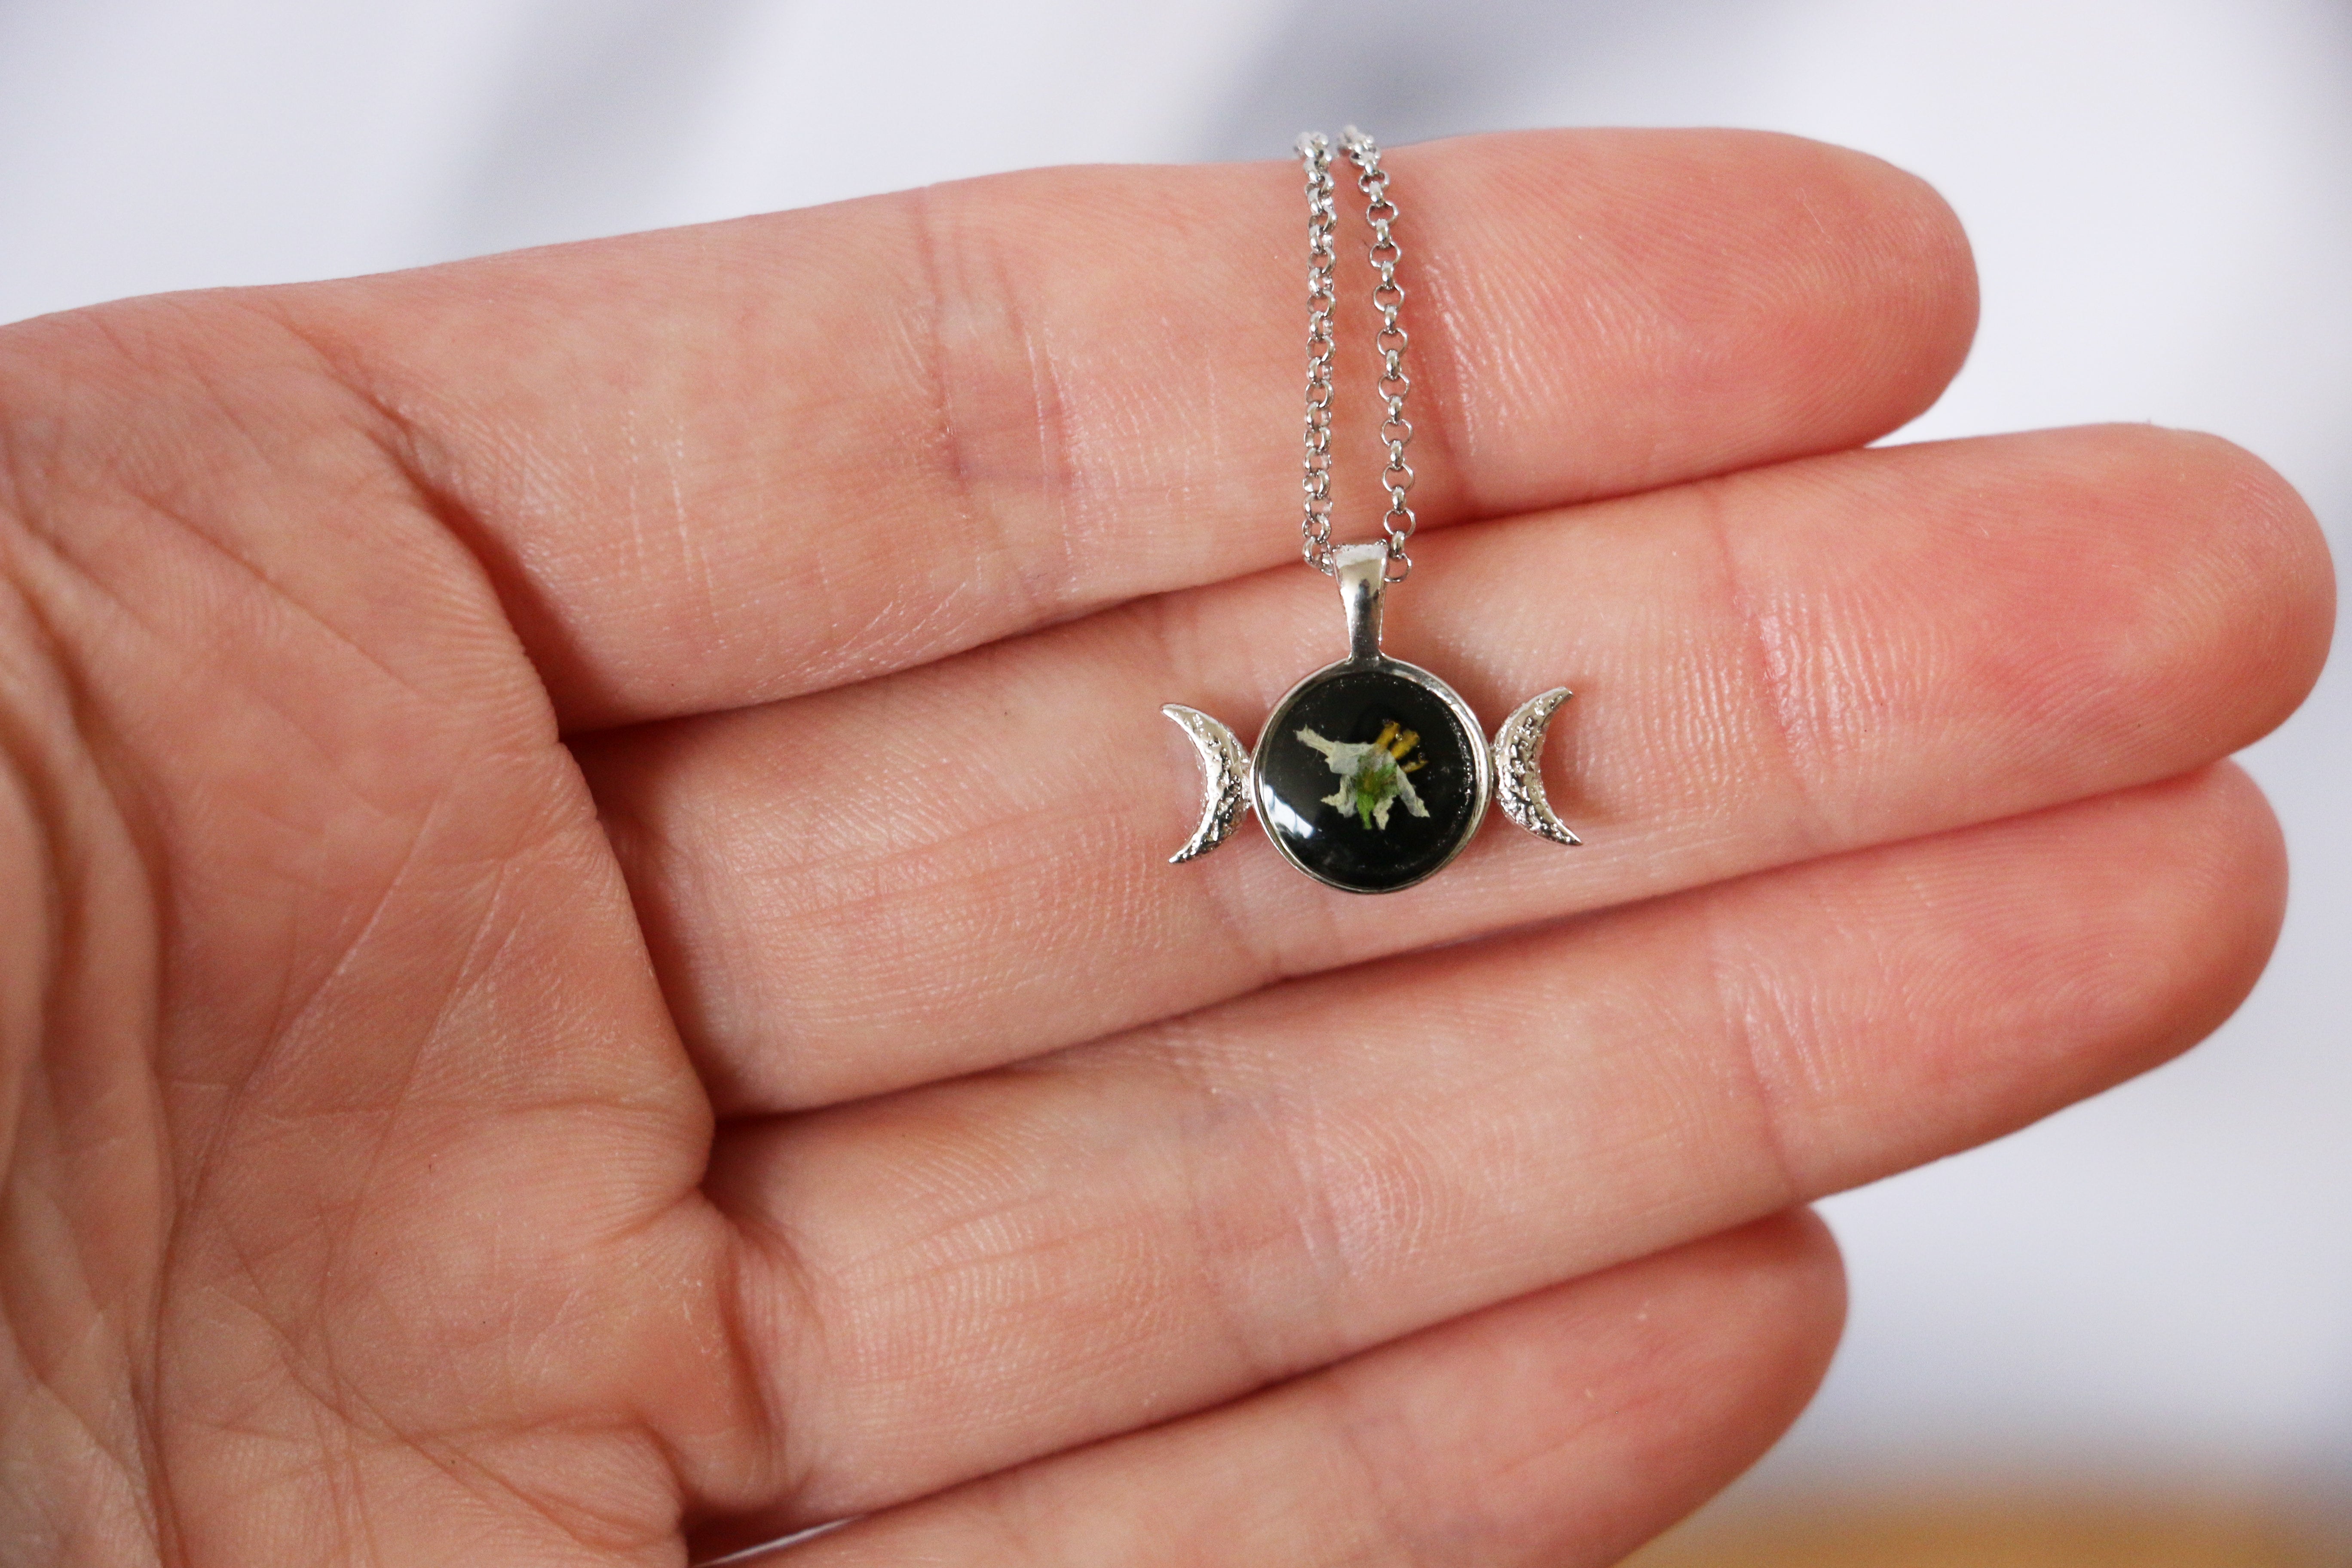 Triple Moon Goddess Moon Necklace 925 Sterling Silver Pagan Pendant 20